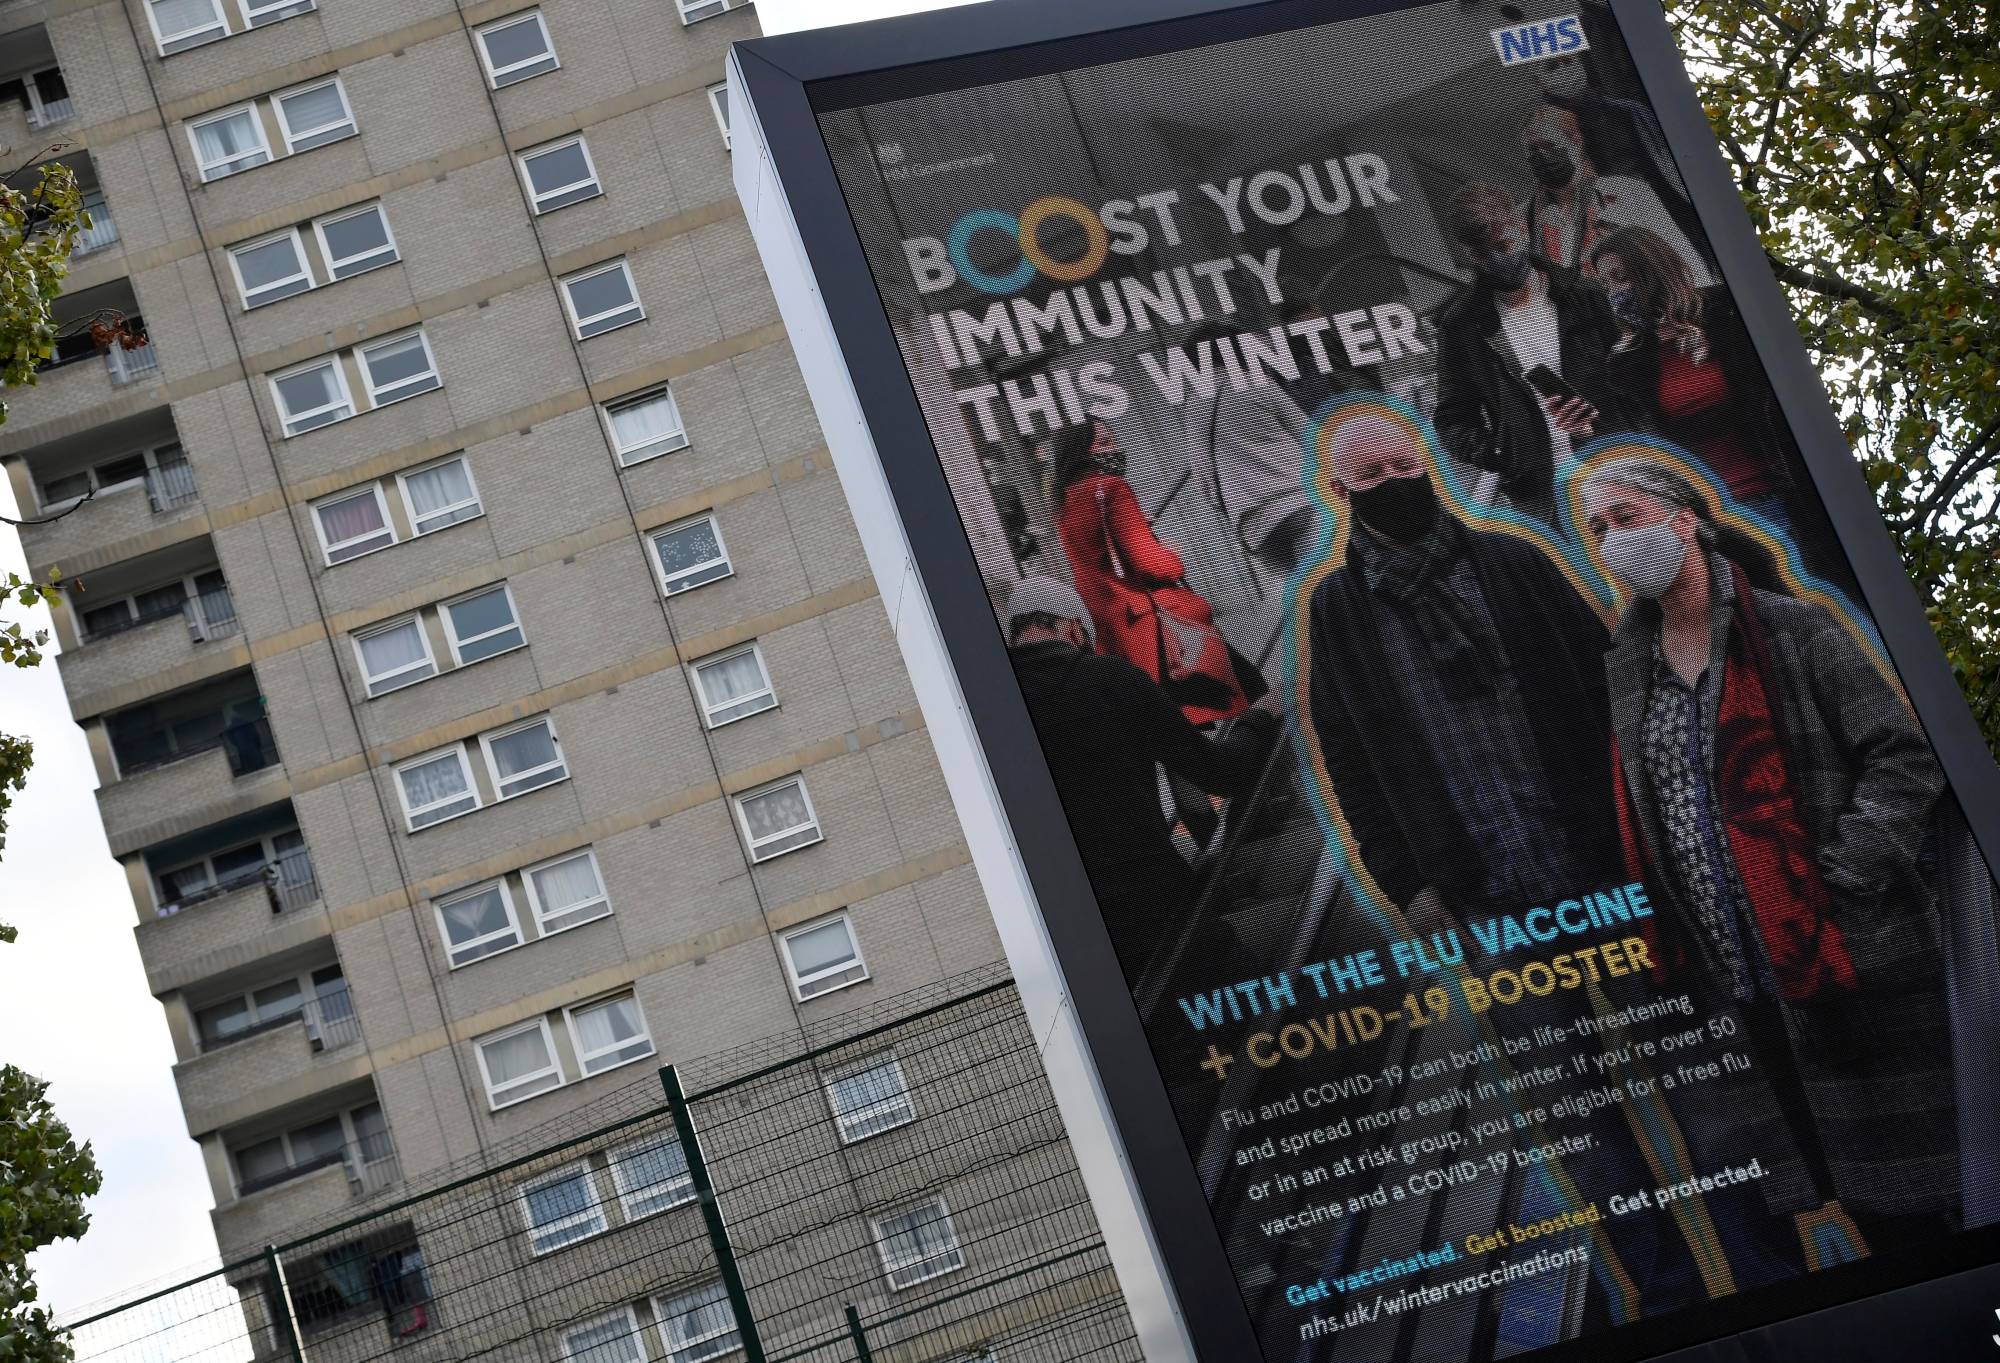 A National Health Service vaccination advertisement near a housing block in London | REUTERS 